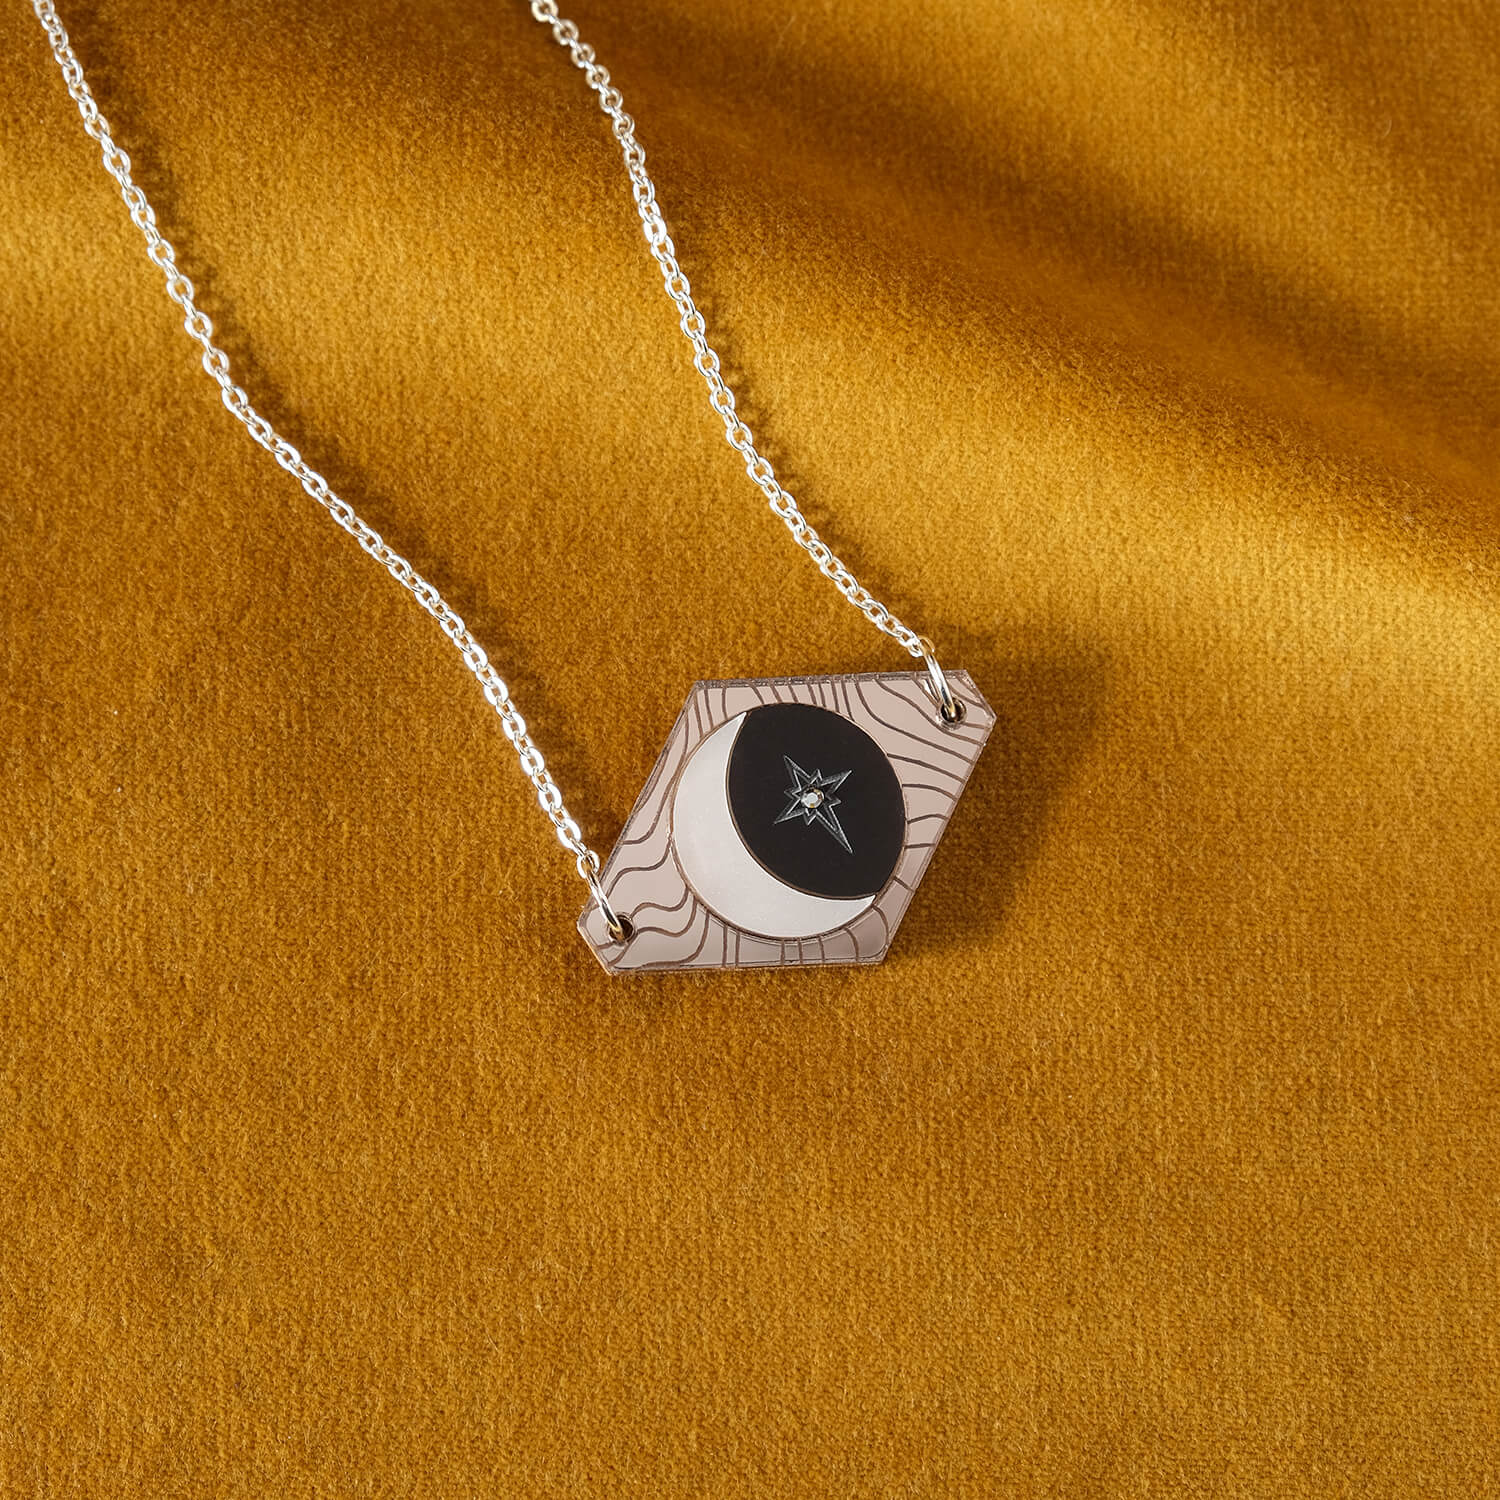 New Moon and North Star Necklace - Handmade by The Moonlit Press in the UK